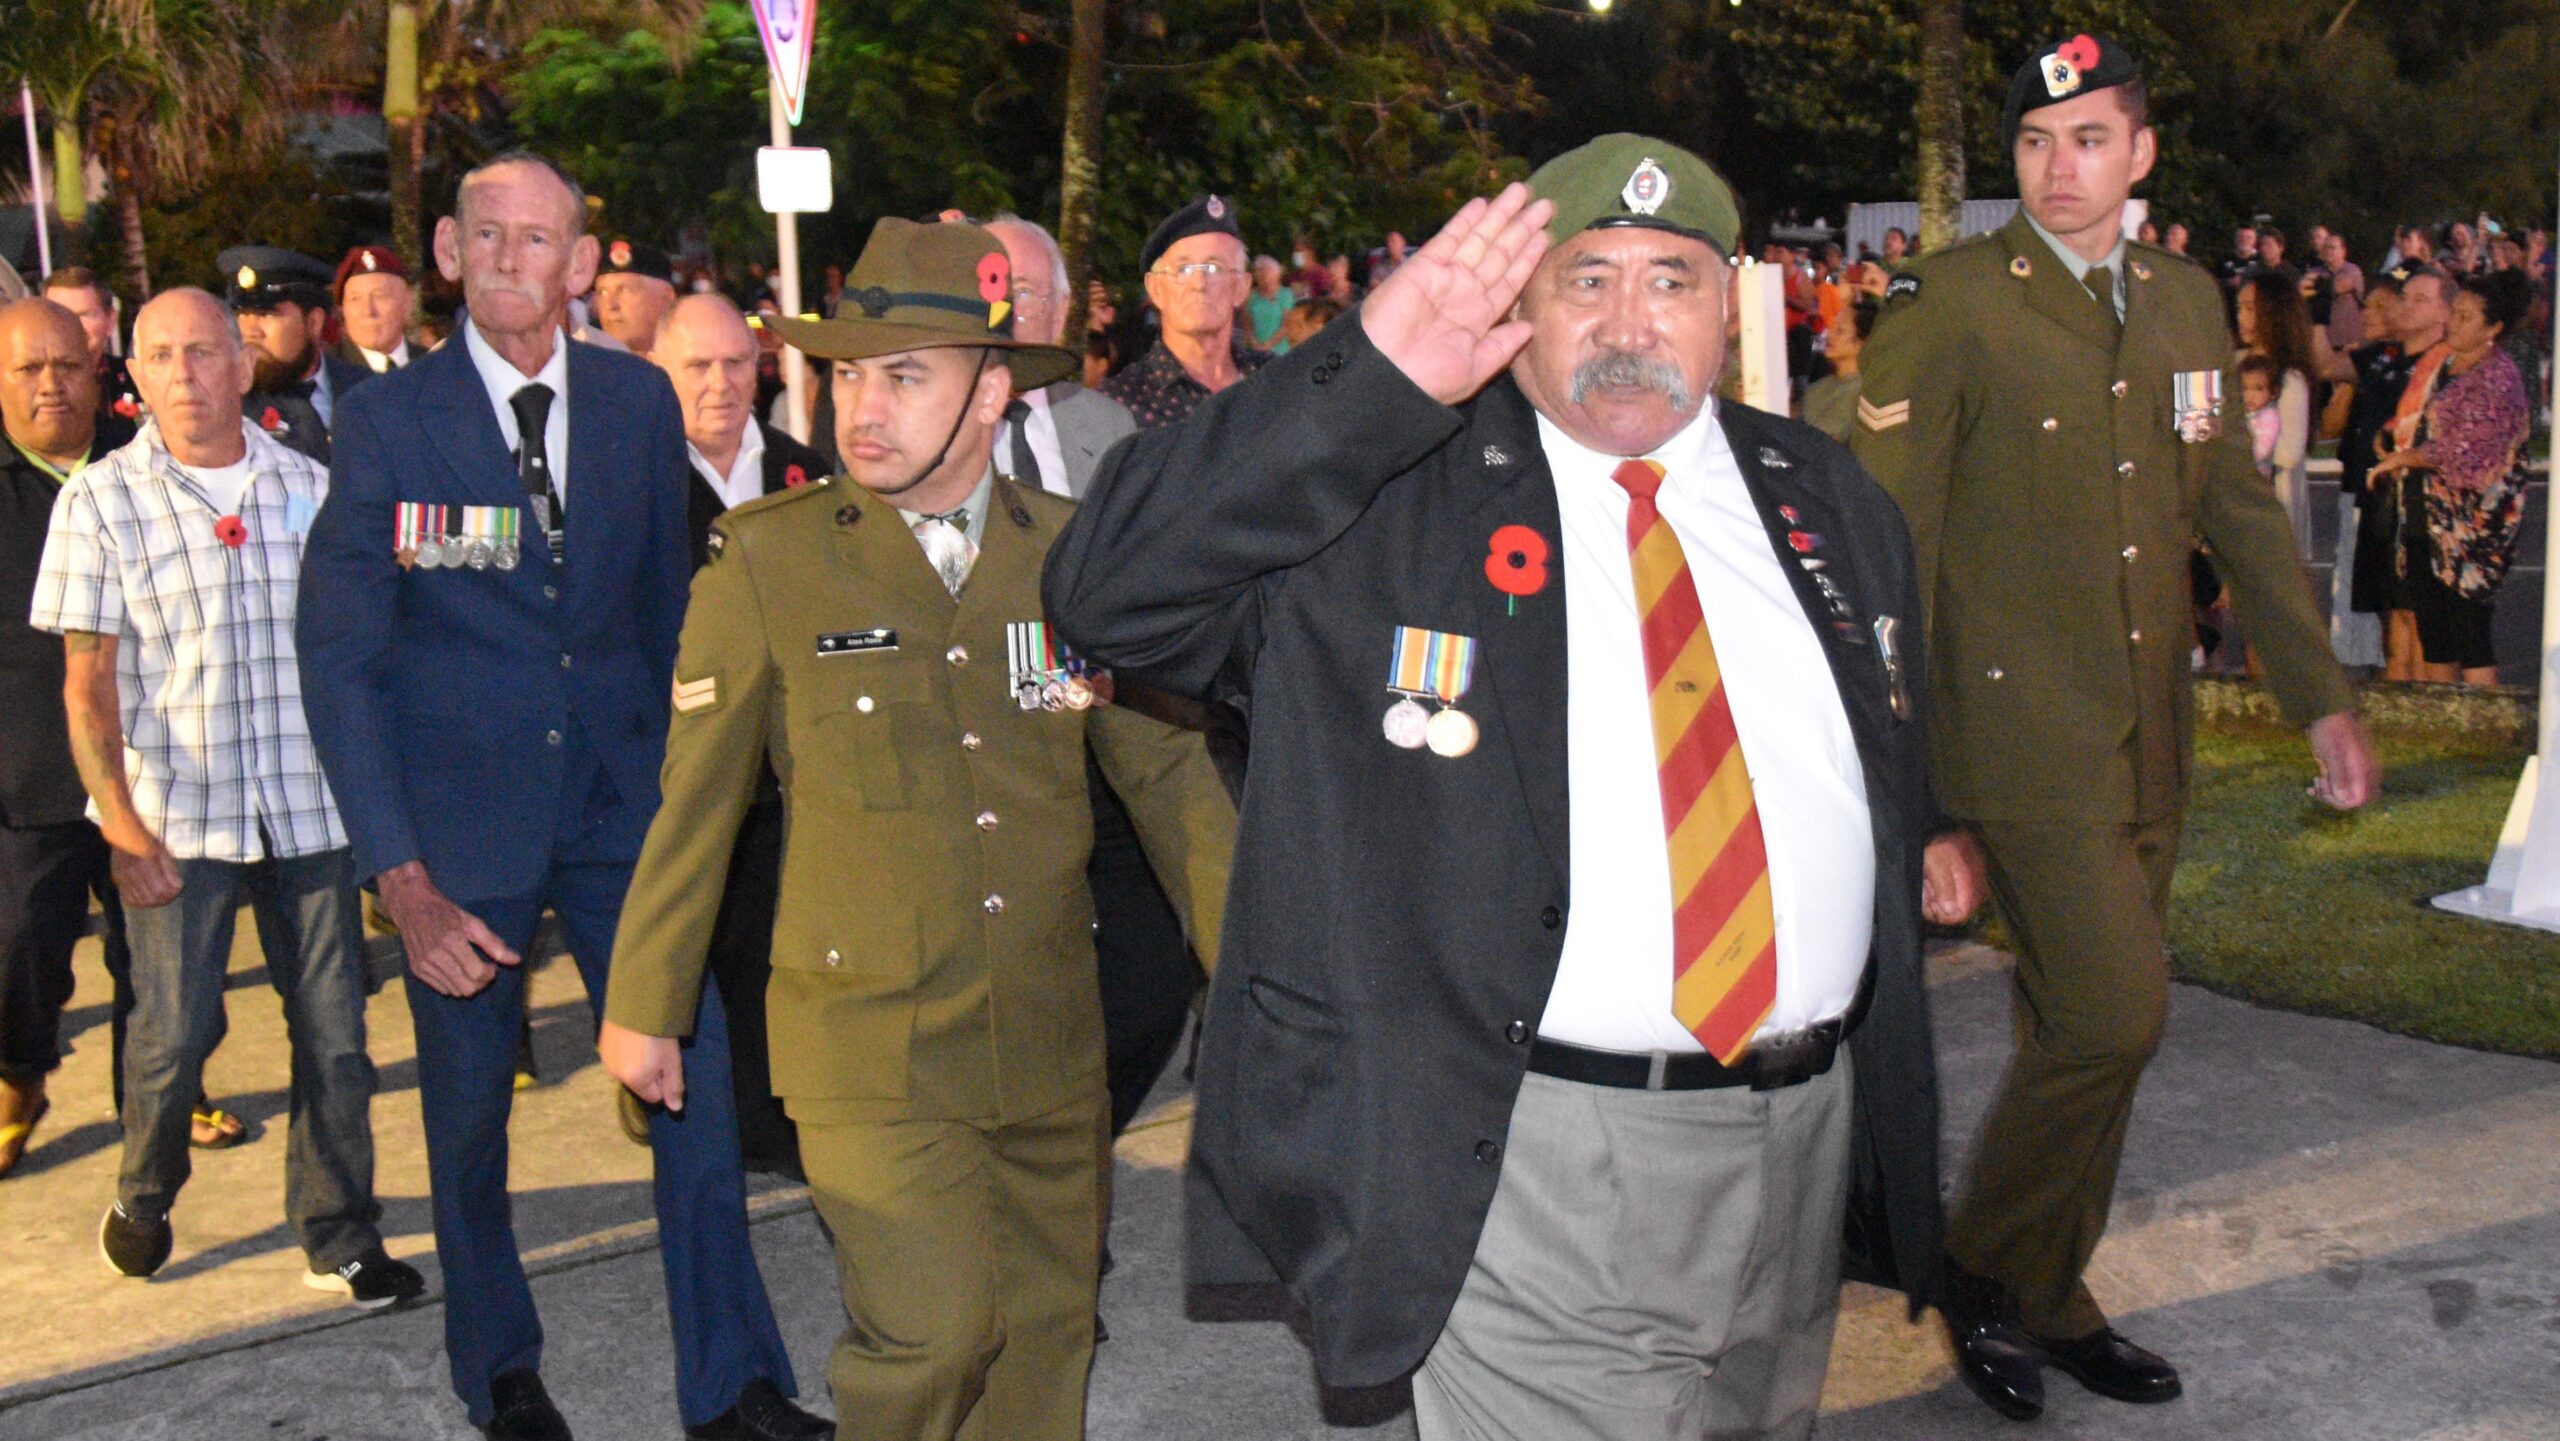 ANZAC DAY: Recognising young veterans